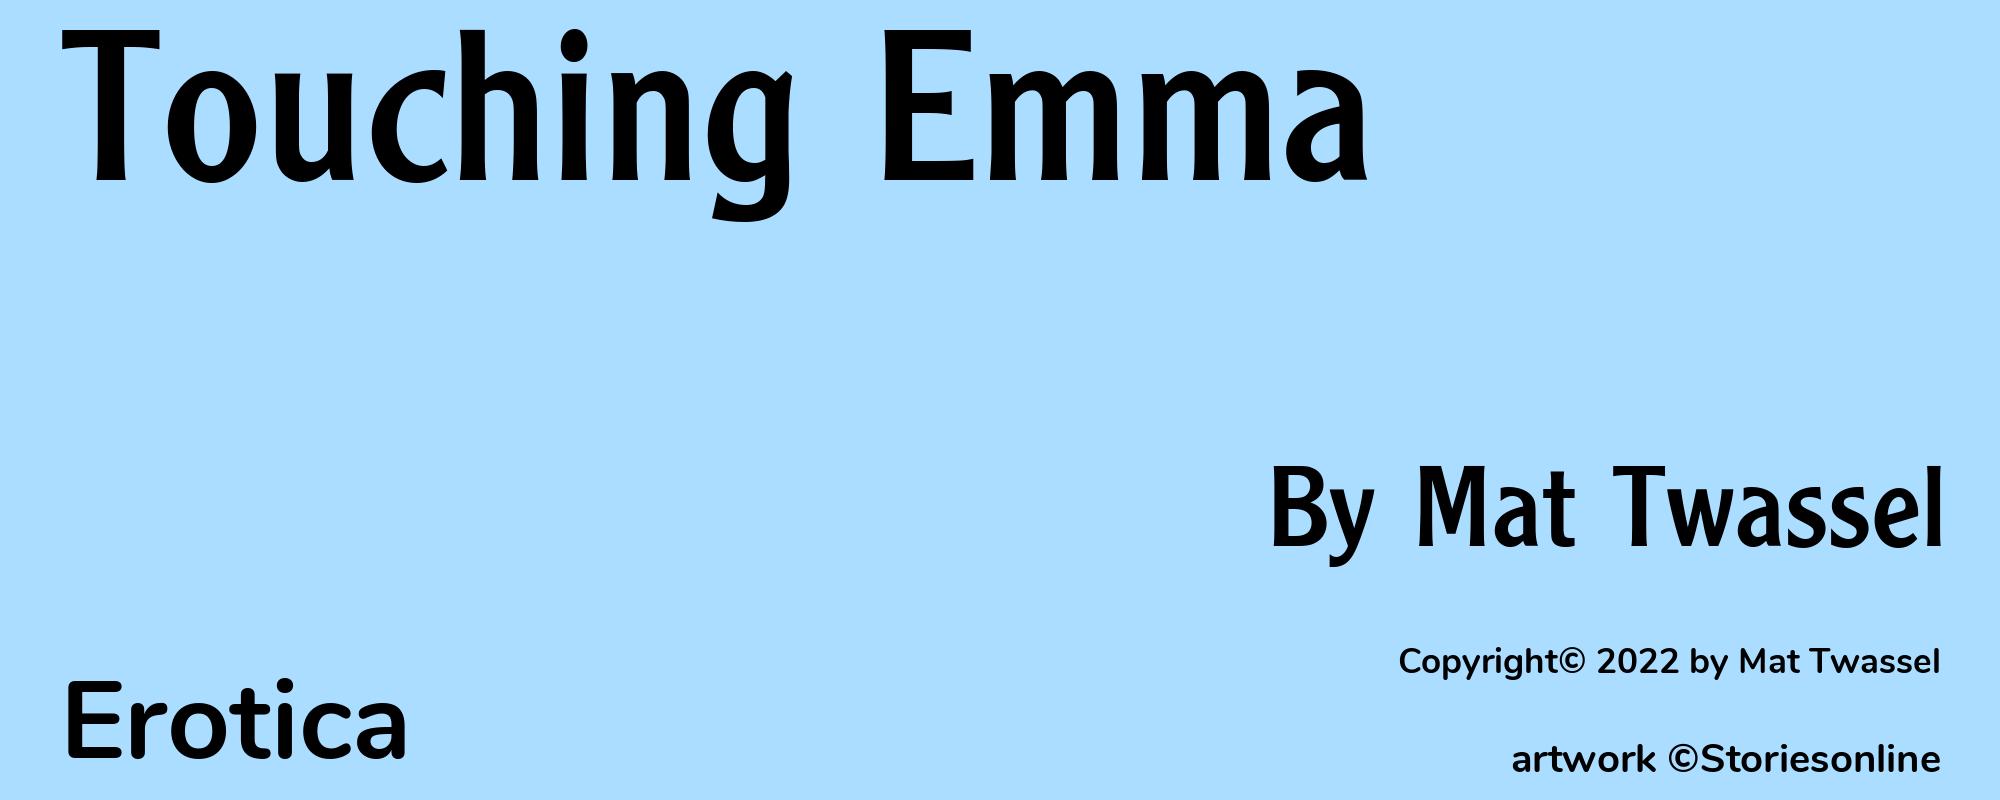 Touching Emma - Cover